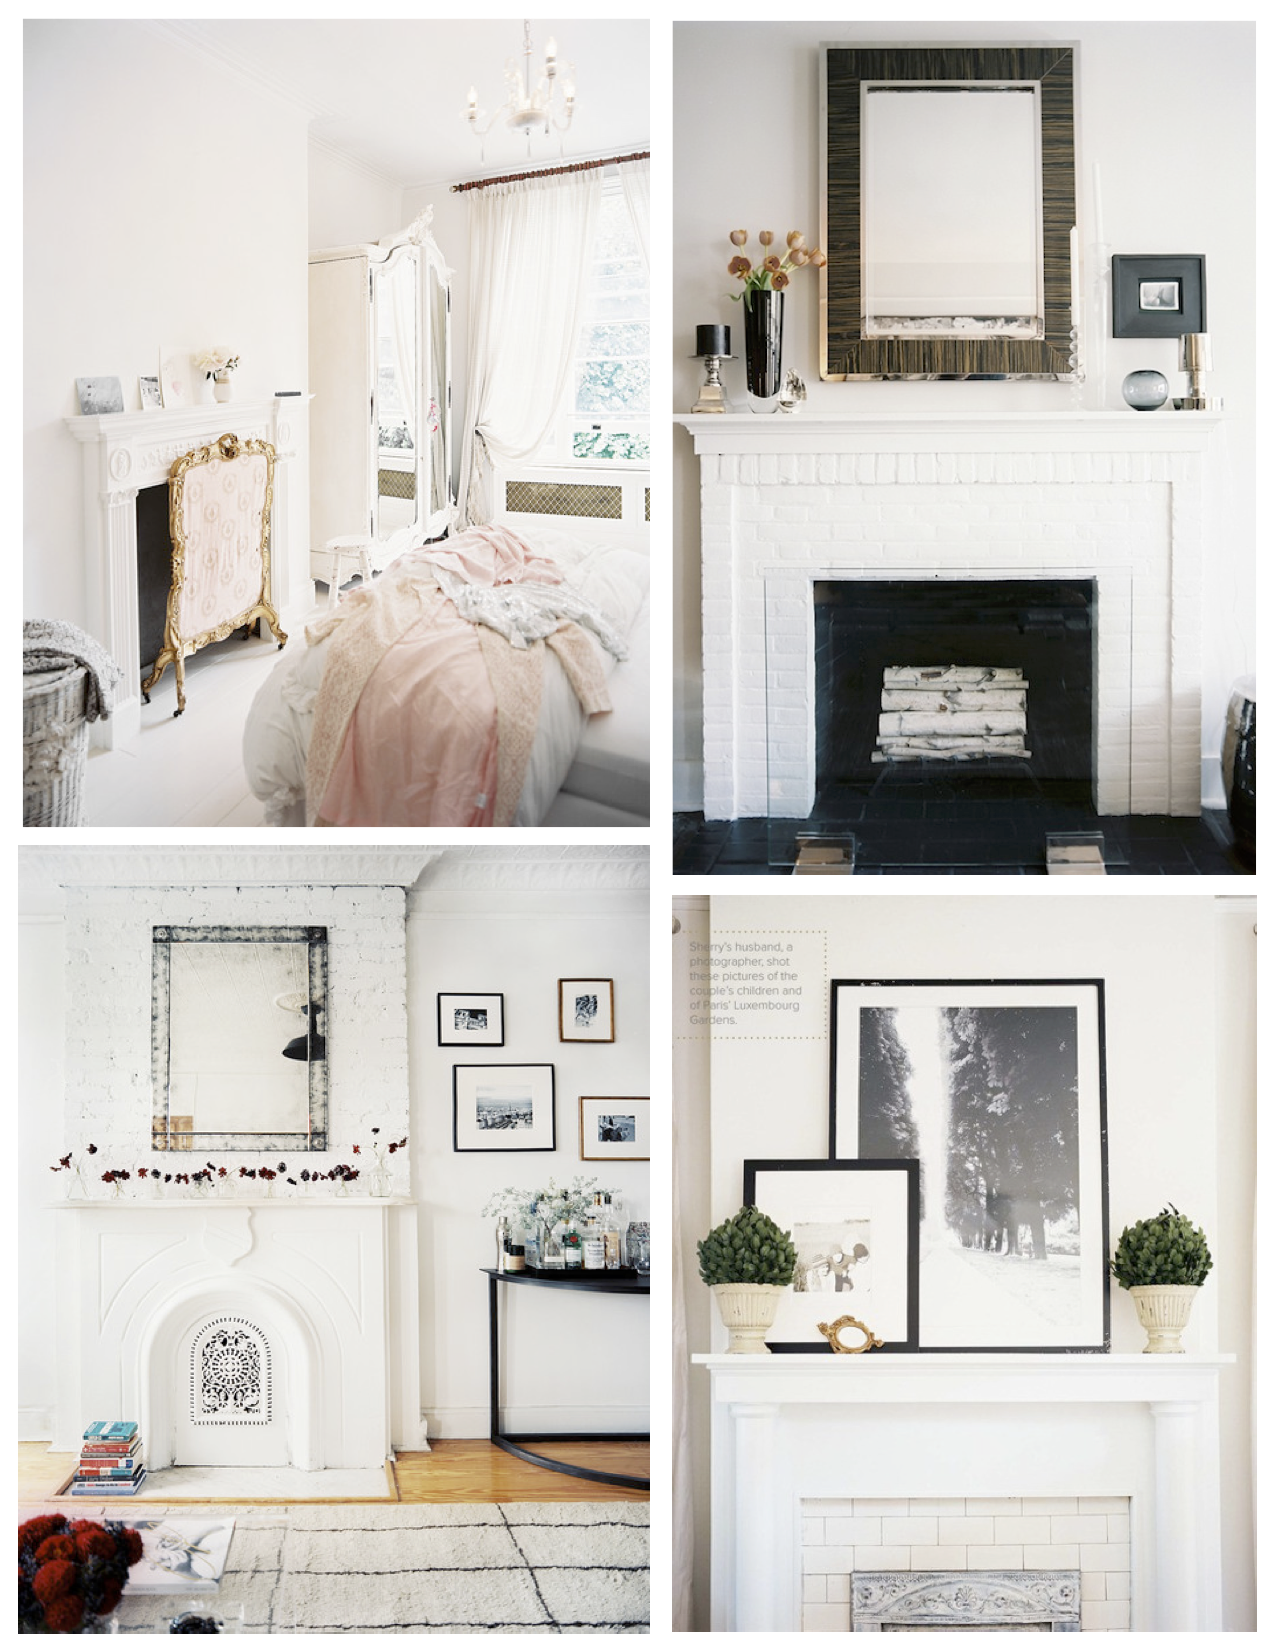 Elegance & Architectural Focal Point:  The Fireplace